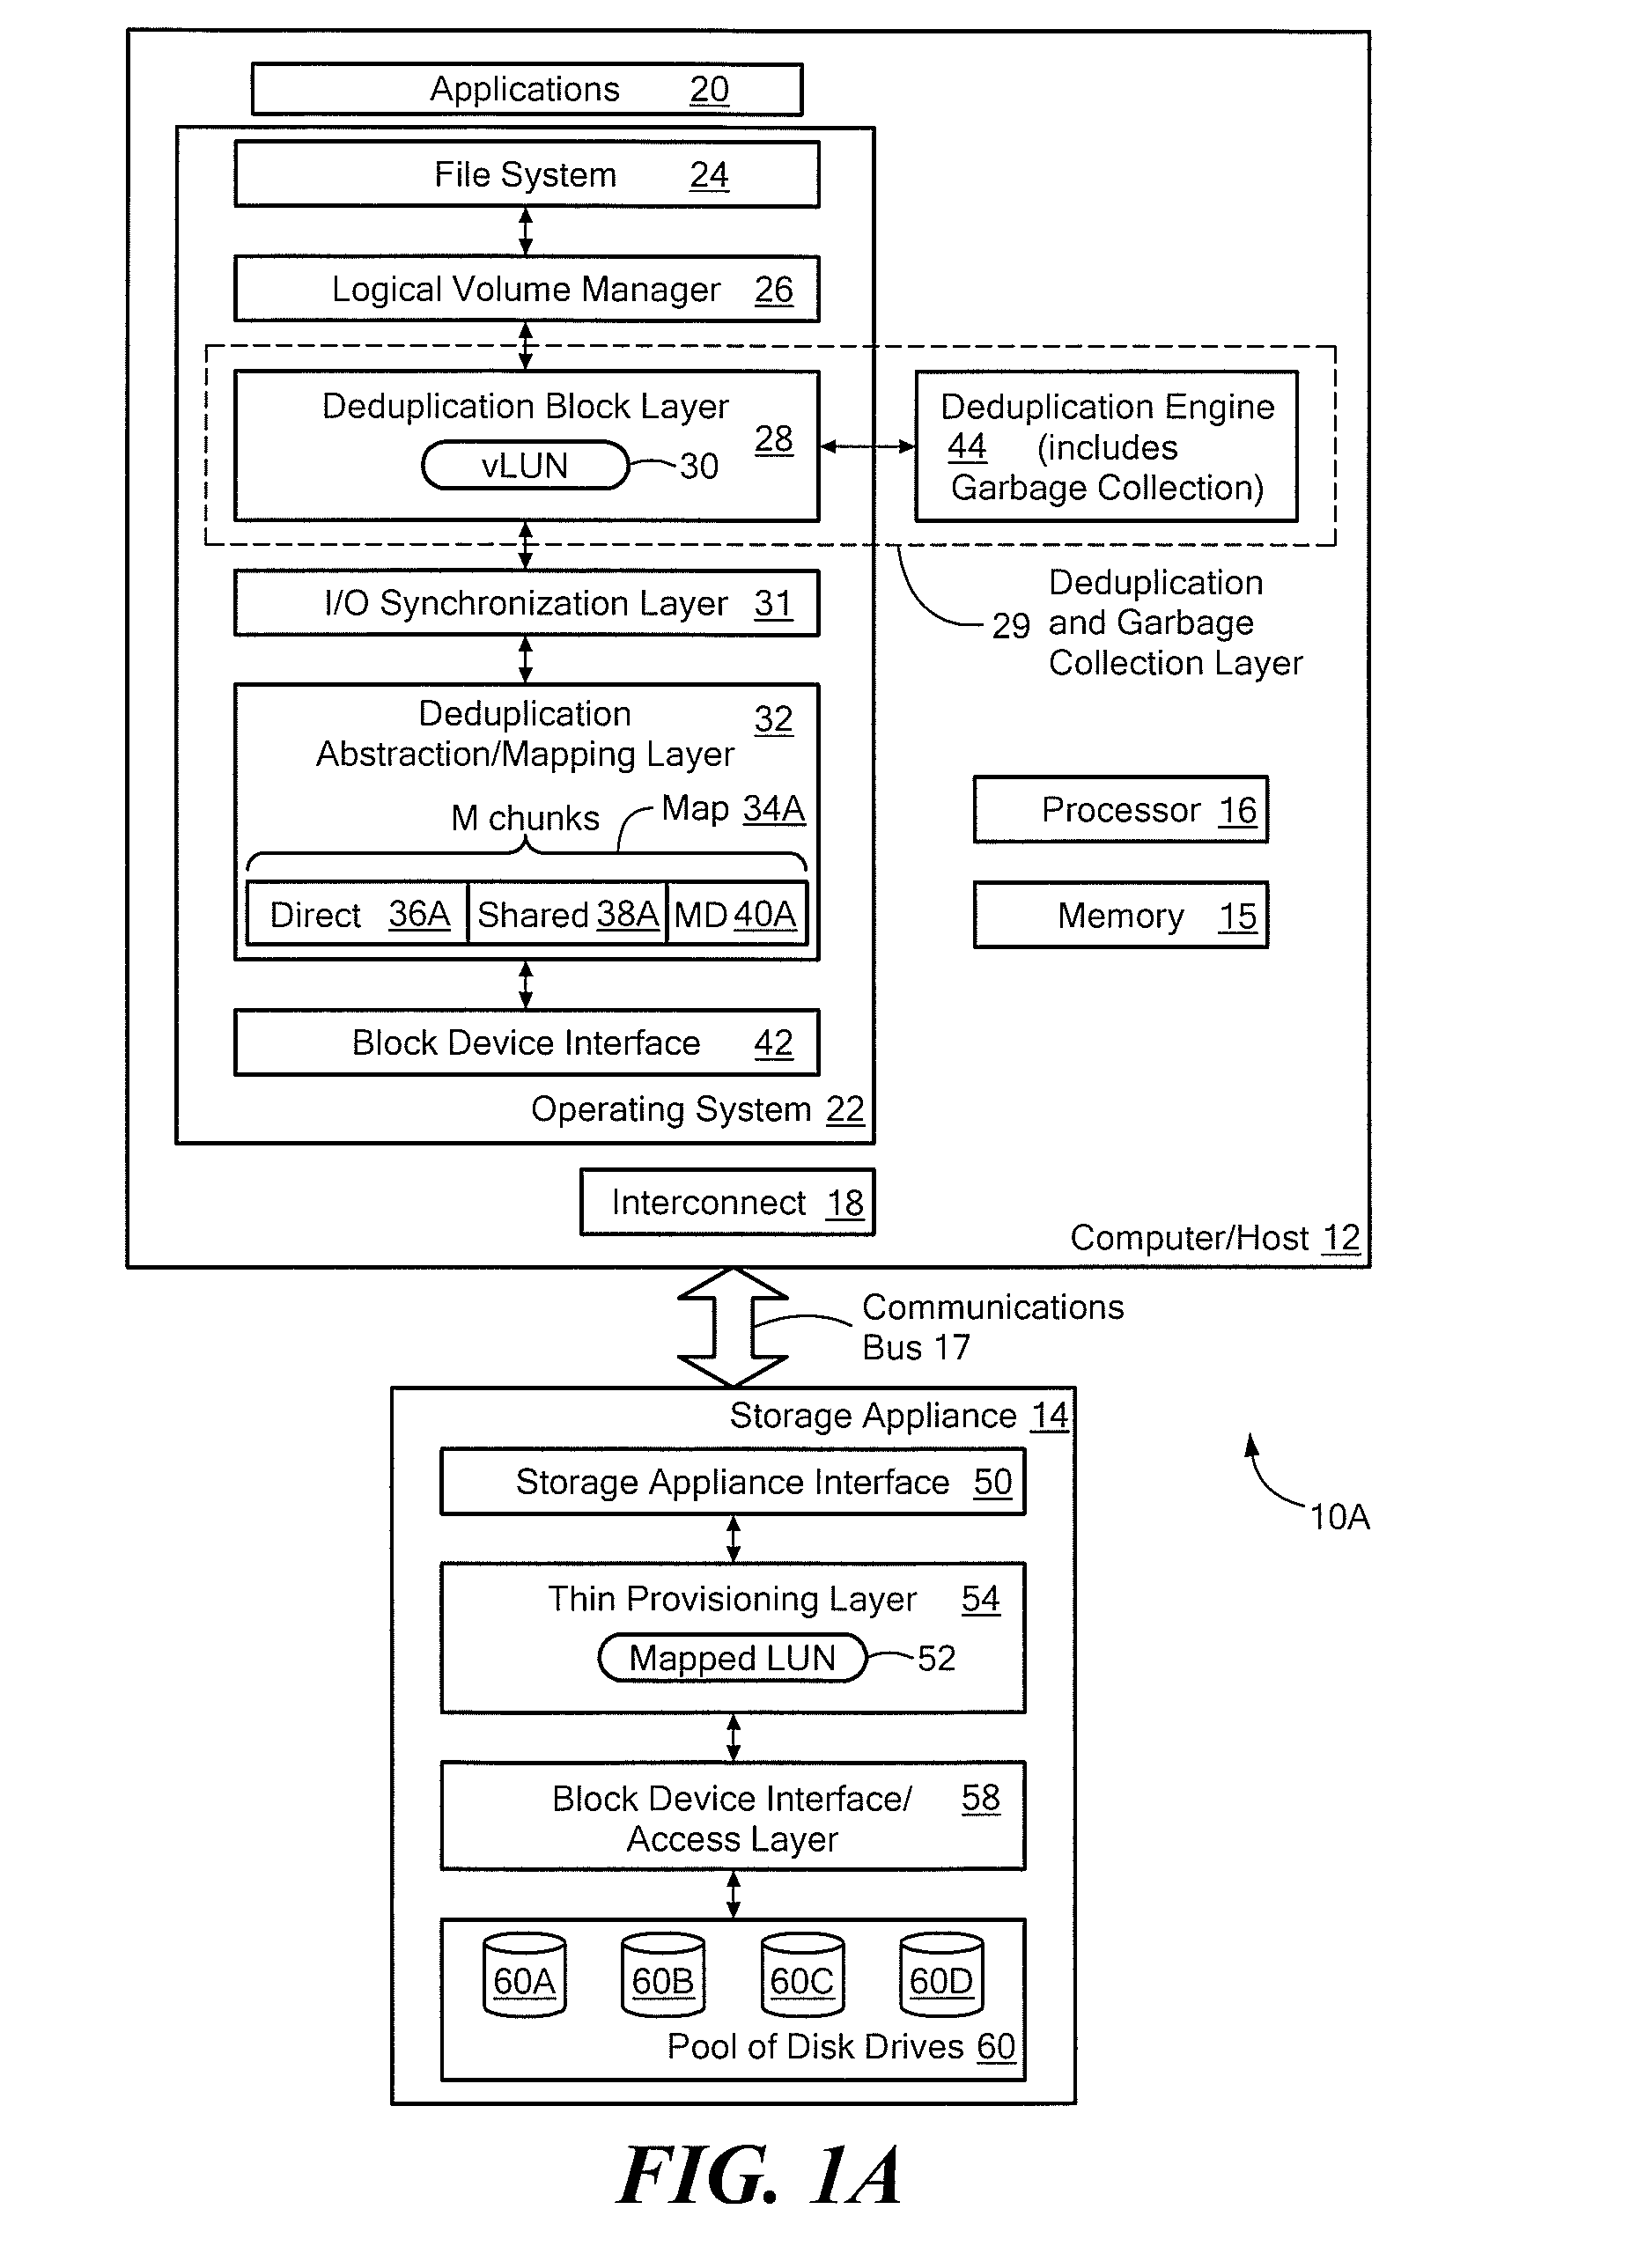 Systems and methods for using thin provisioning to reclaim space identified by data reduction processes